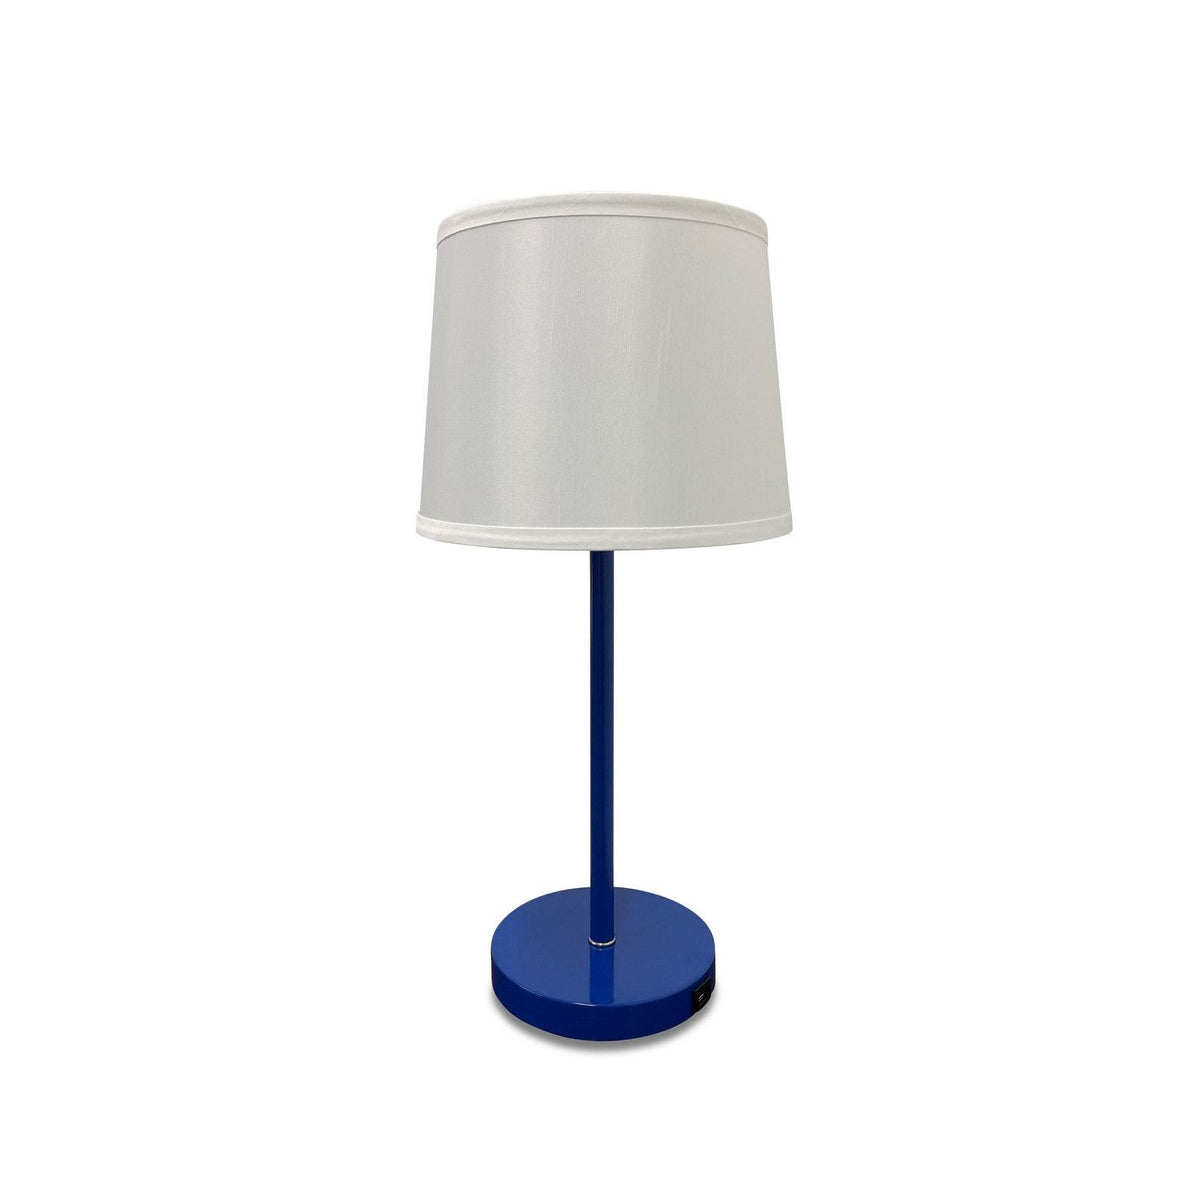 House of Troy - S550-COSN - One Light Table Lamp - Sawyer - Colbalt/Satin Nickel